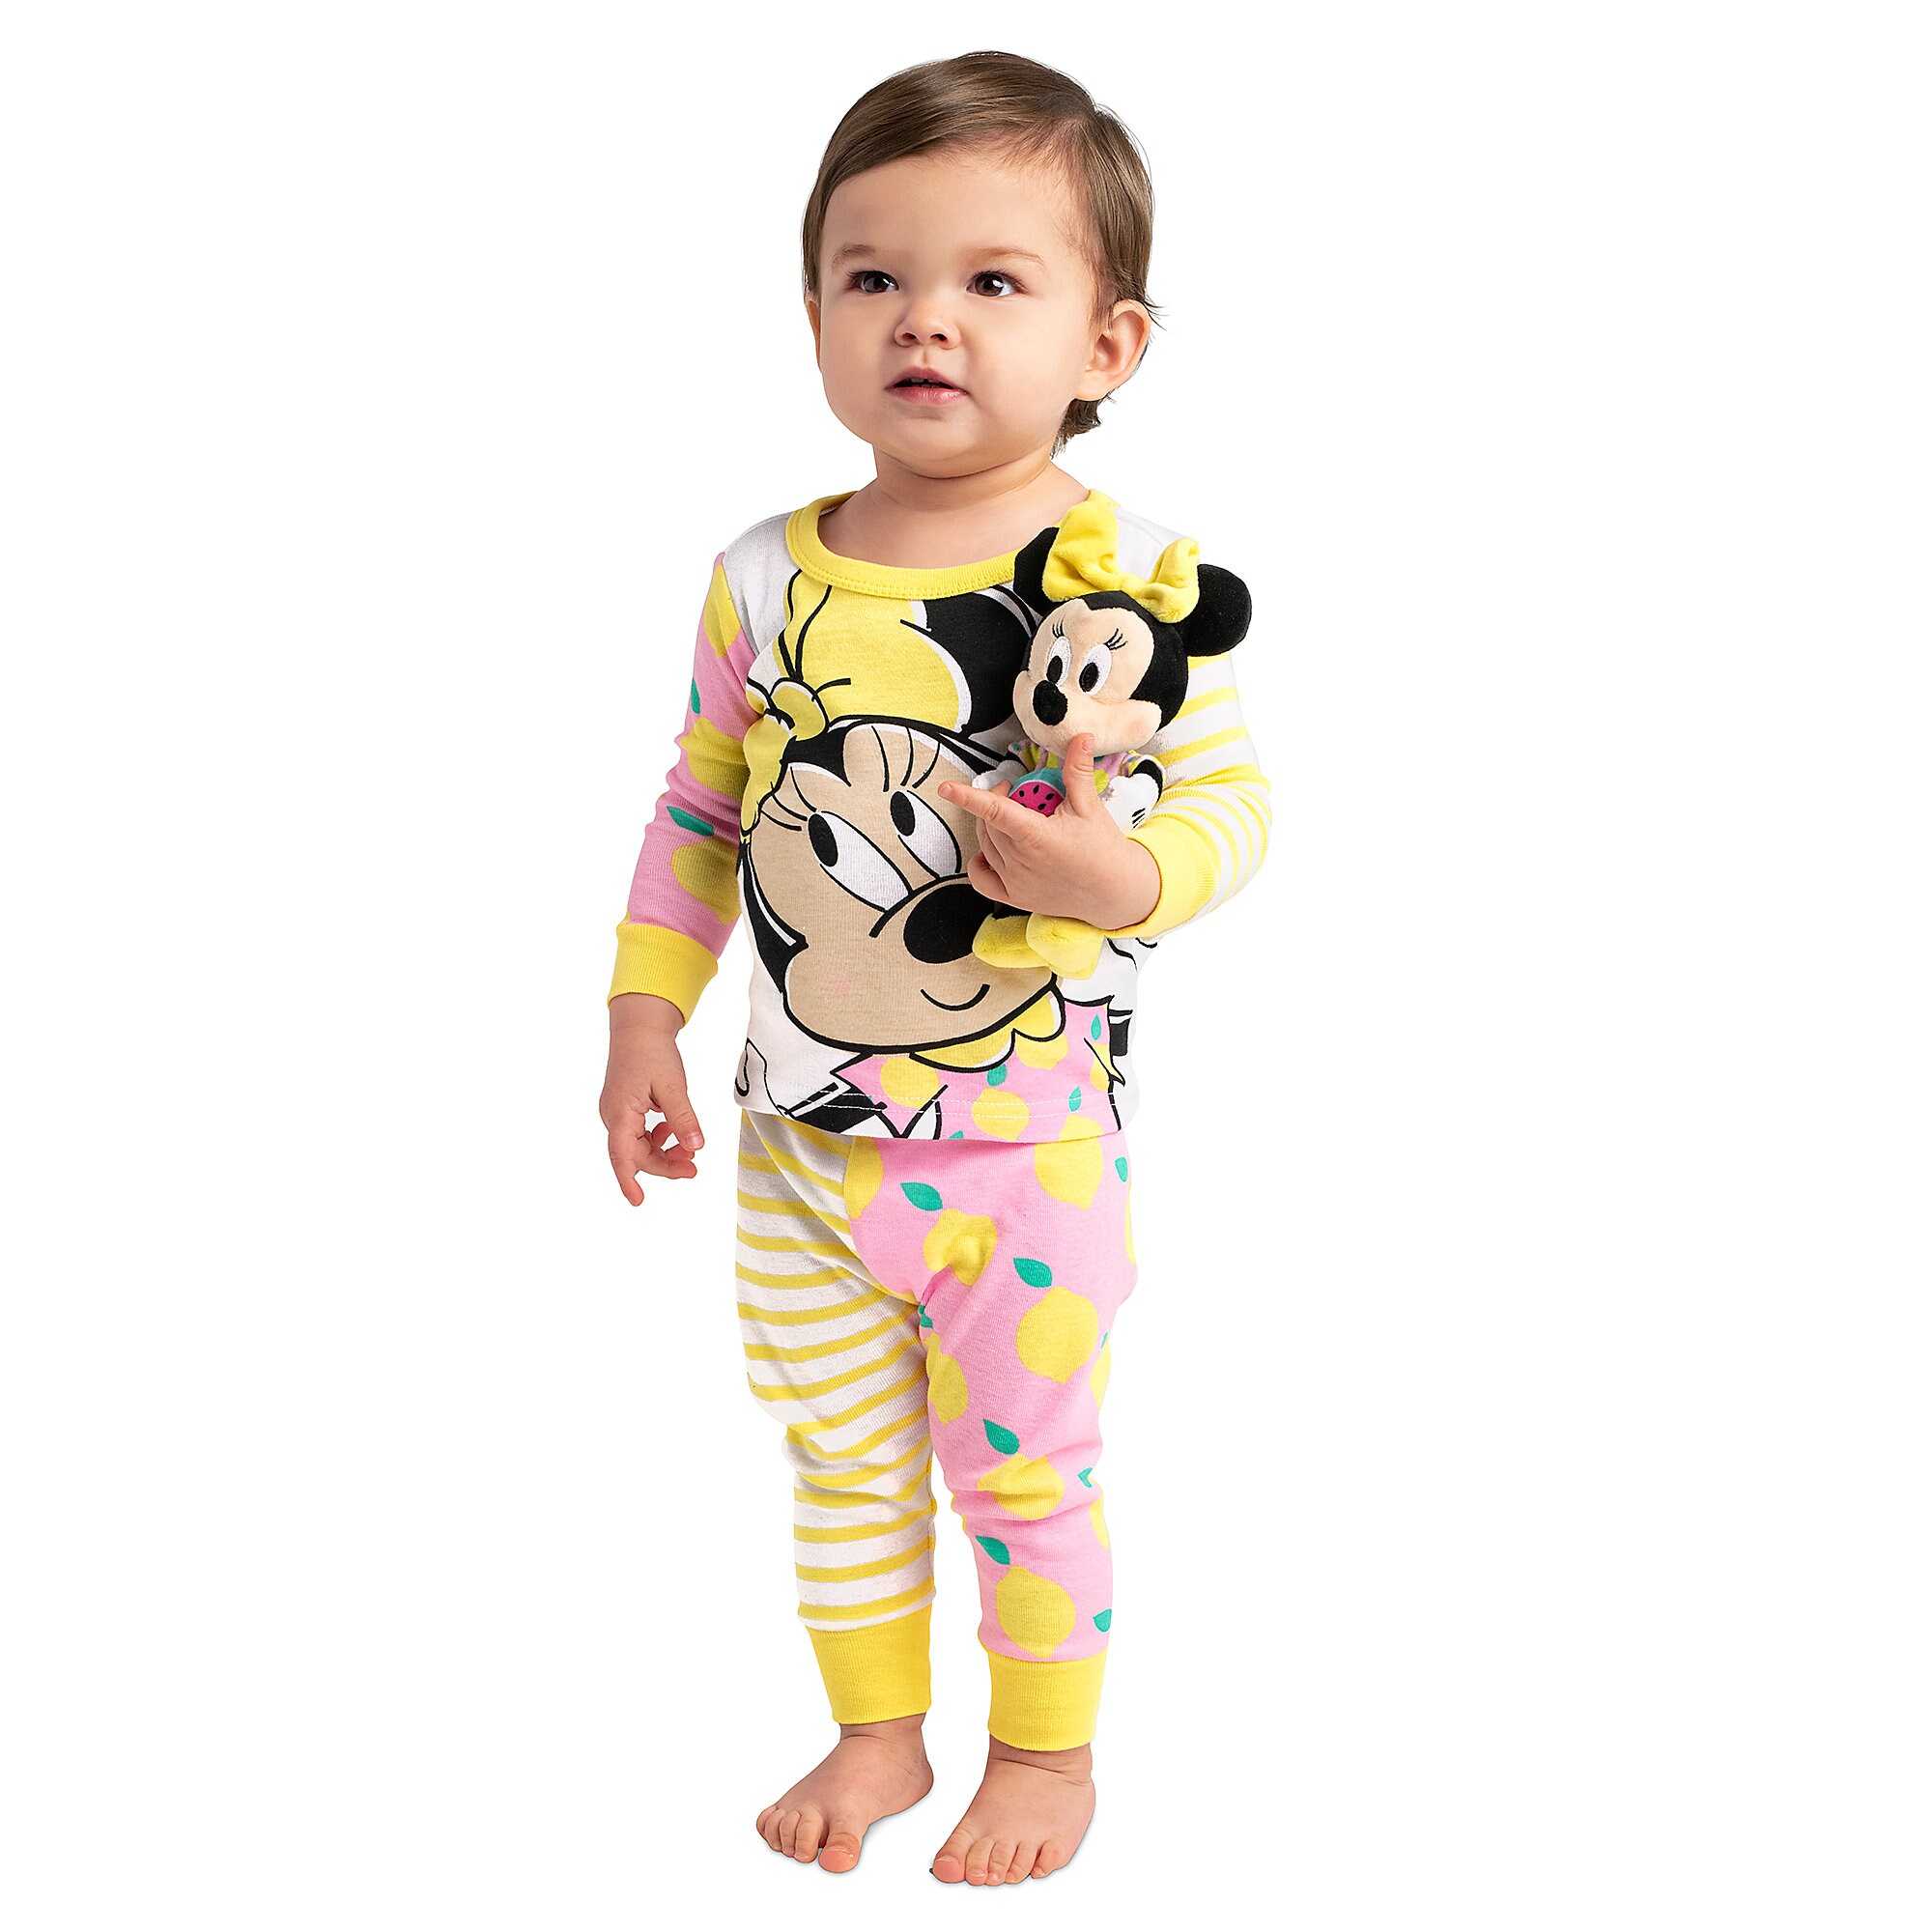 Minnie Mouse PJ PALS and Plush Rattle Set for Baby